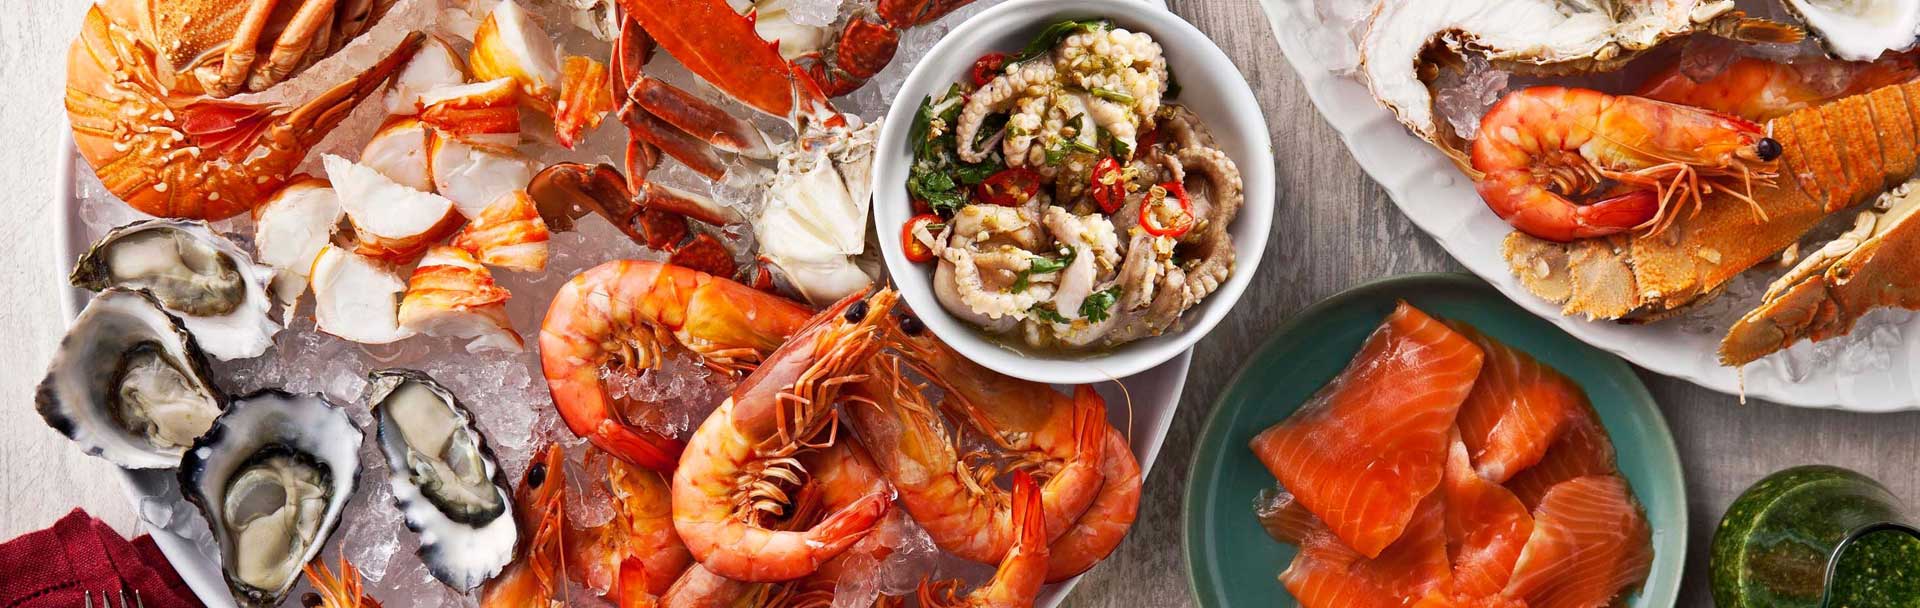 seafood health benefits platers of seafoods